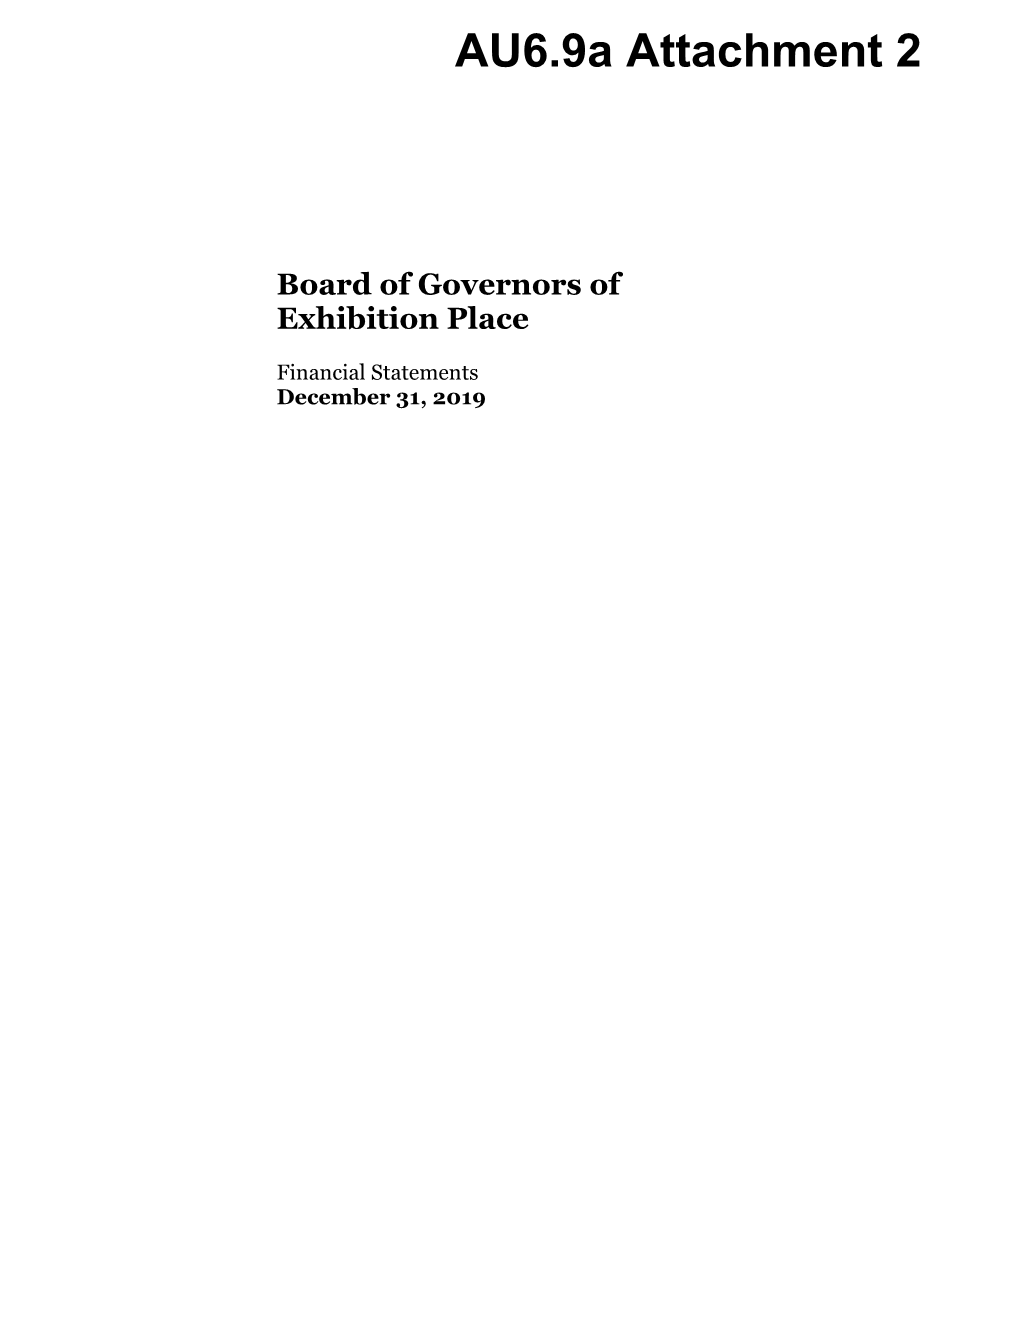 Board of Governors of Exhibition Place Financial Statements